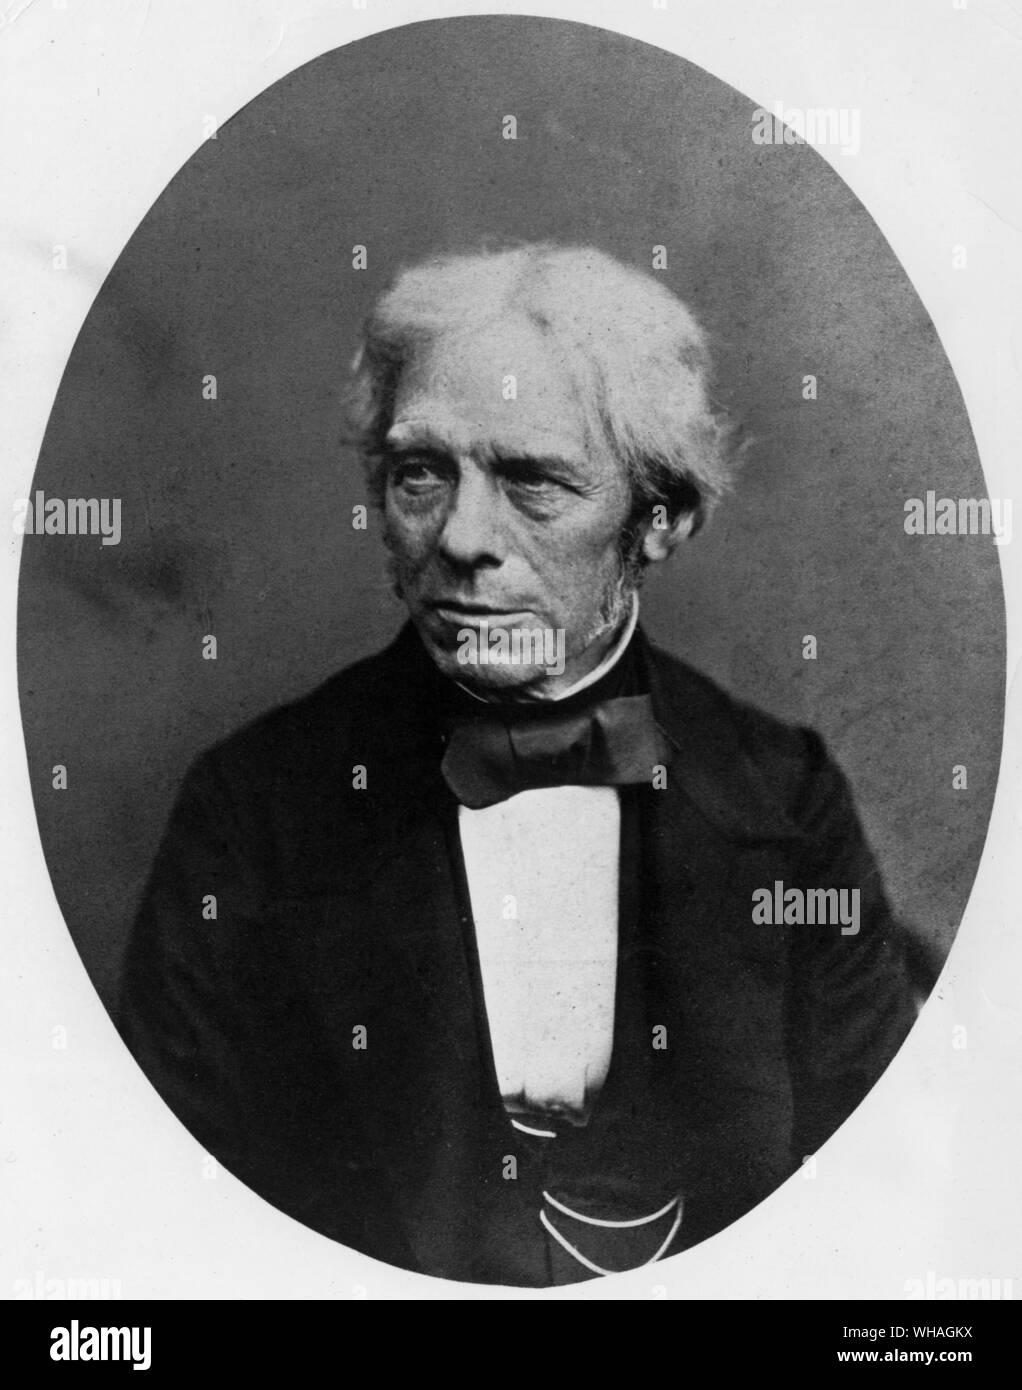 Michael Faraday. Faraday, Michael English chemist and physicist; inventor of electric motor; discovered benzene; discoverer and eponym of Faraday effect  1791-1867 . . Stock Photo